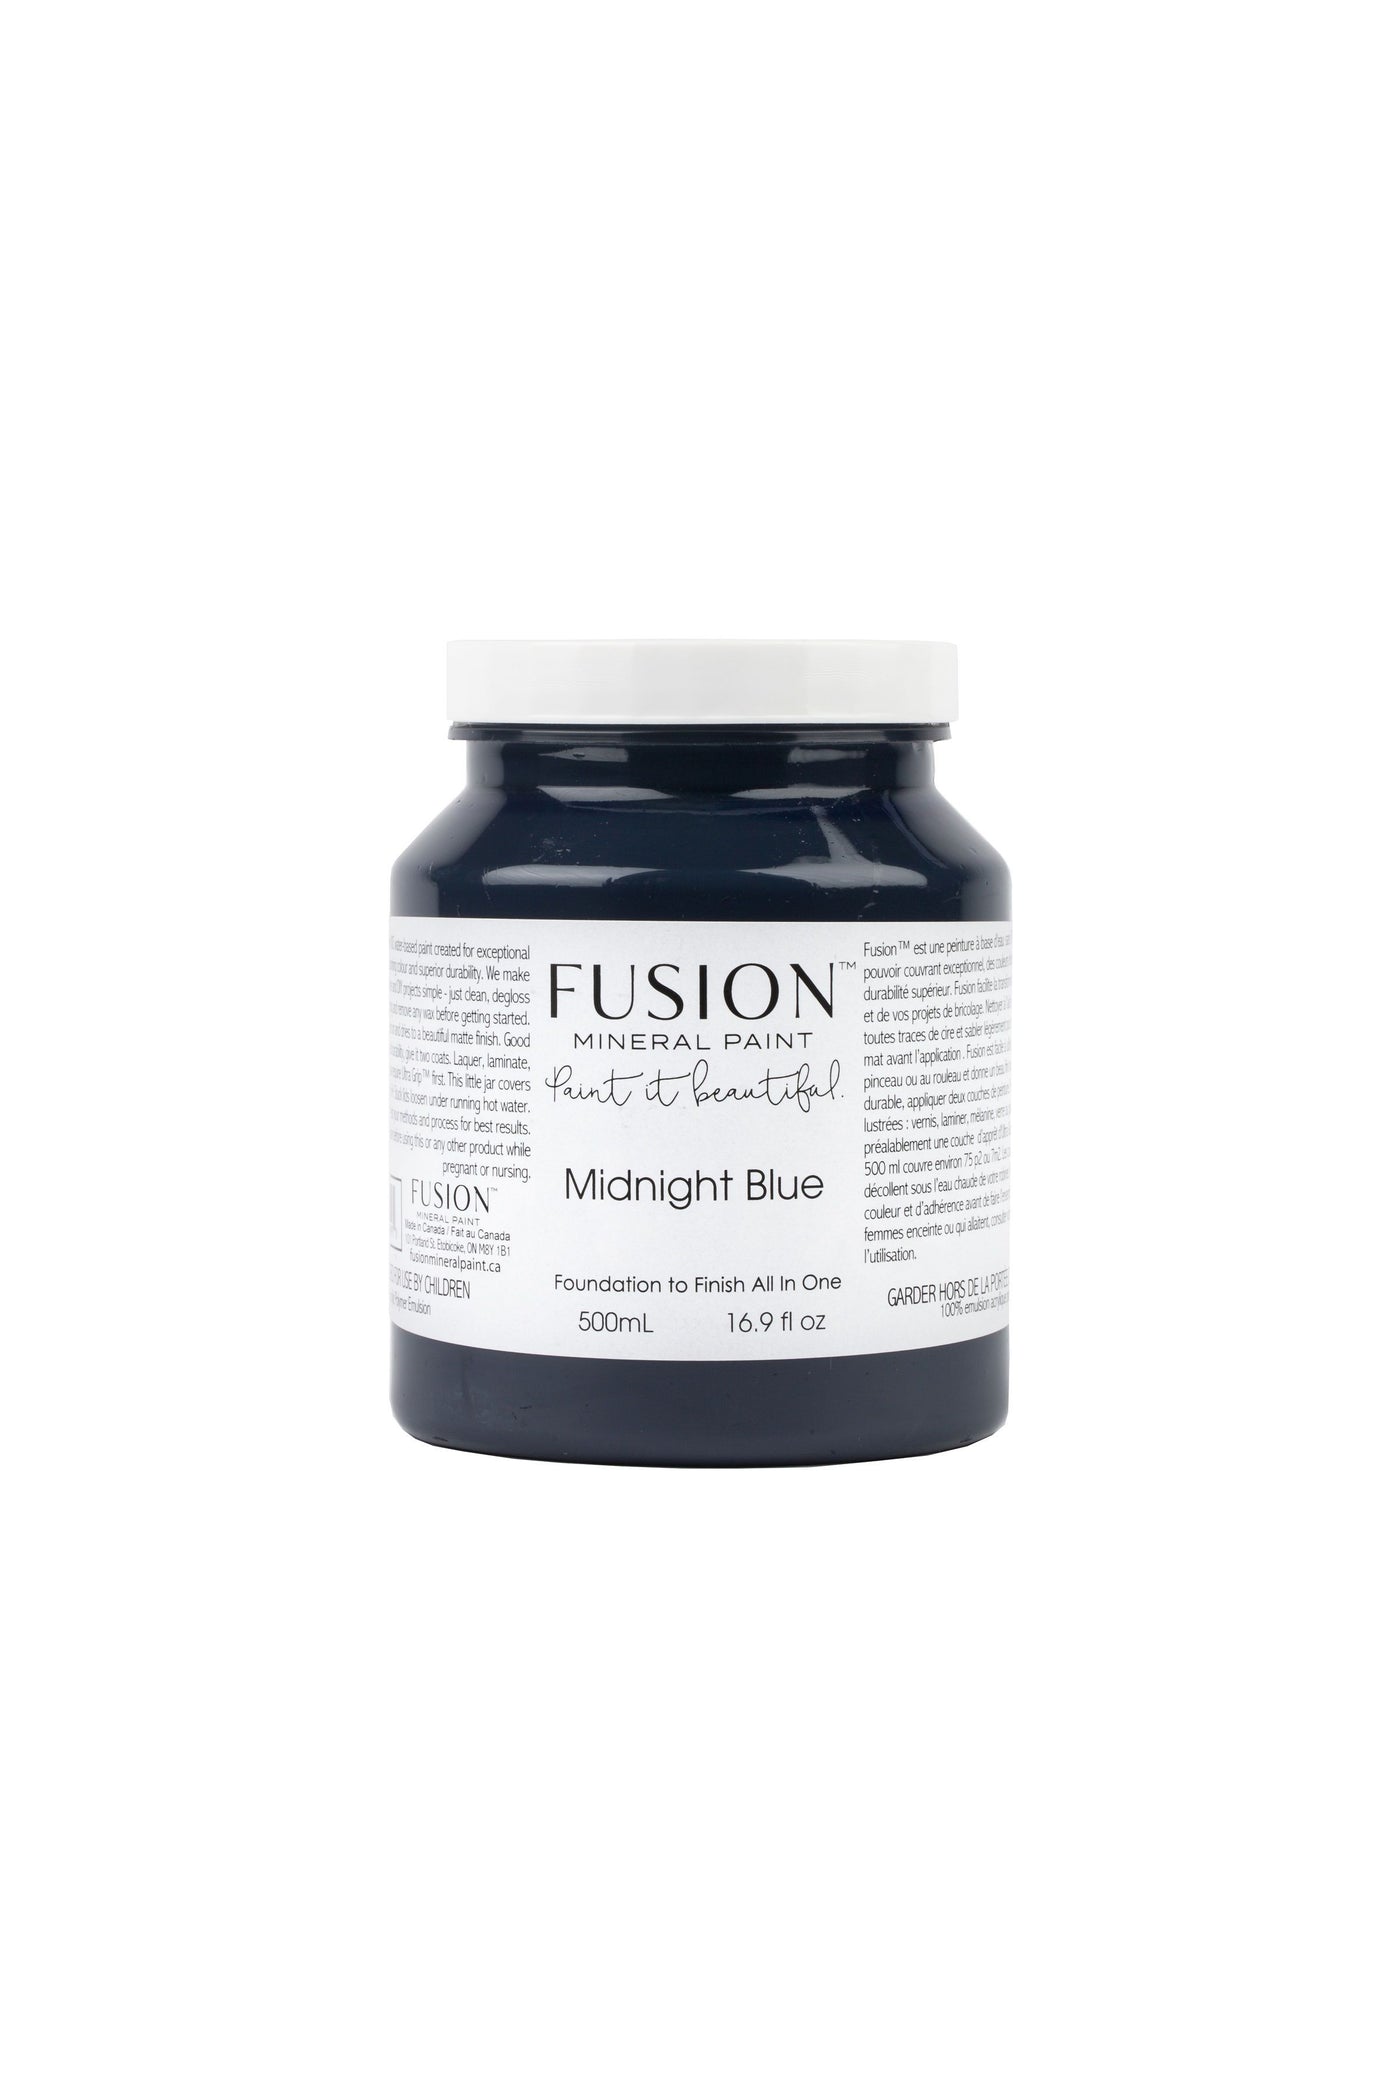 Fusion Mineral Paint - MIDNIGHT BLUE deep navy almost blue-black 500ml